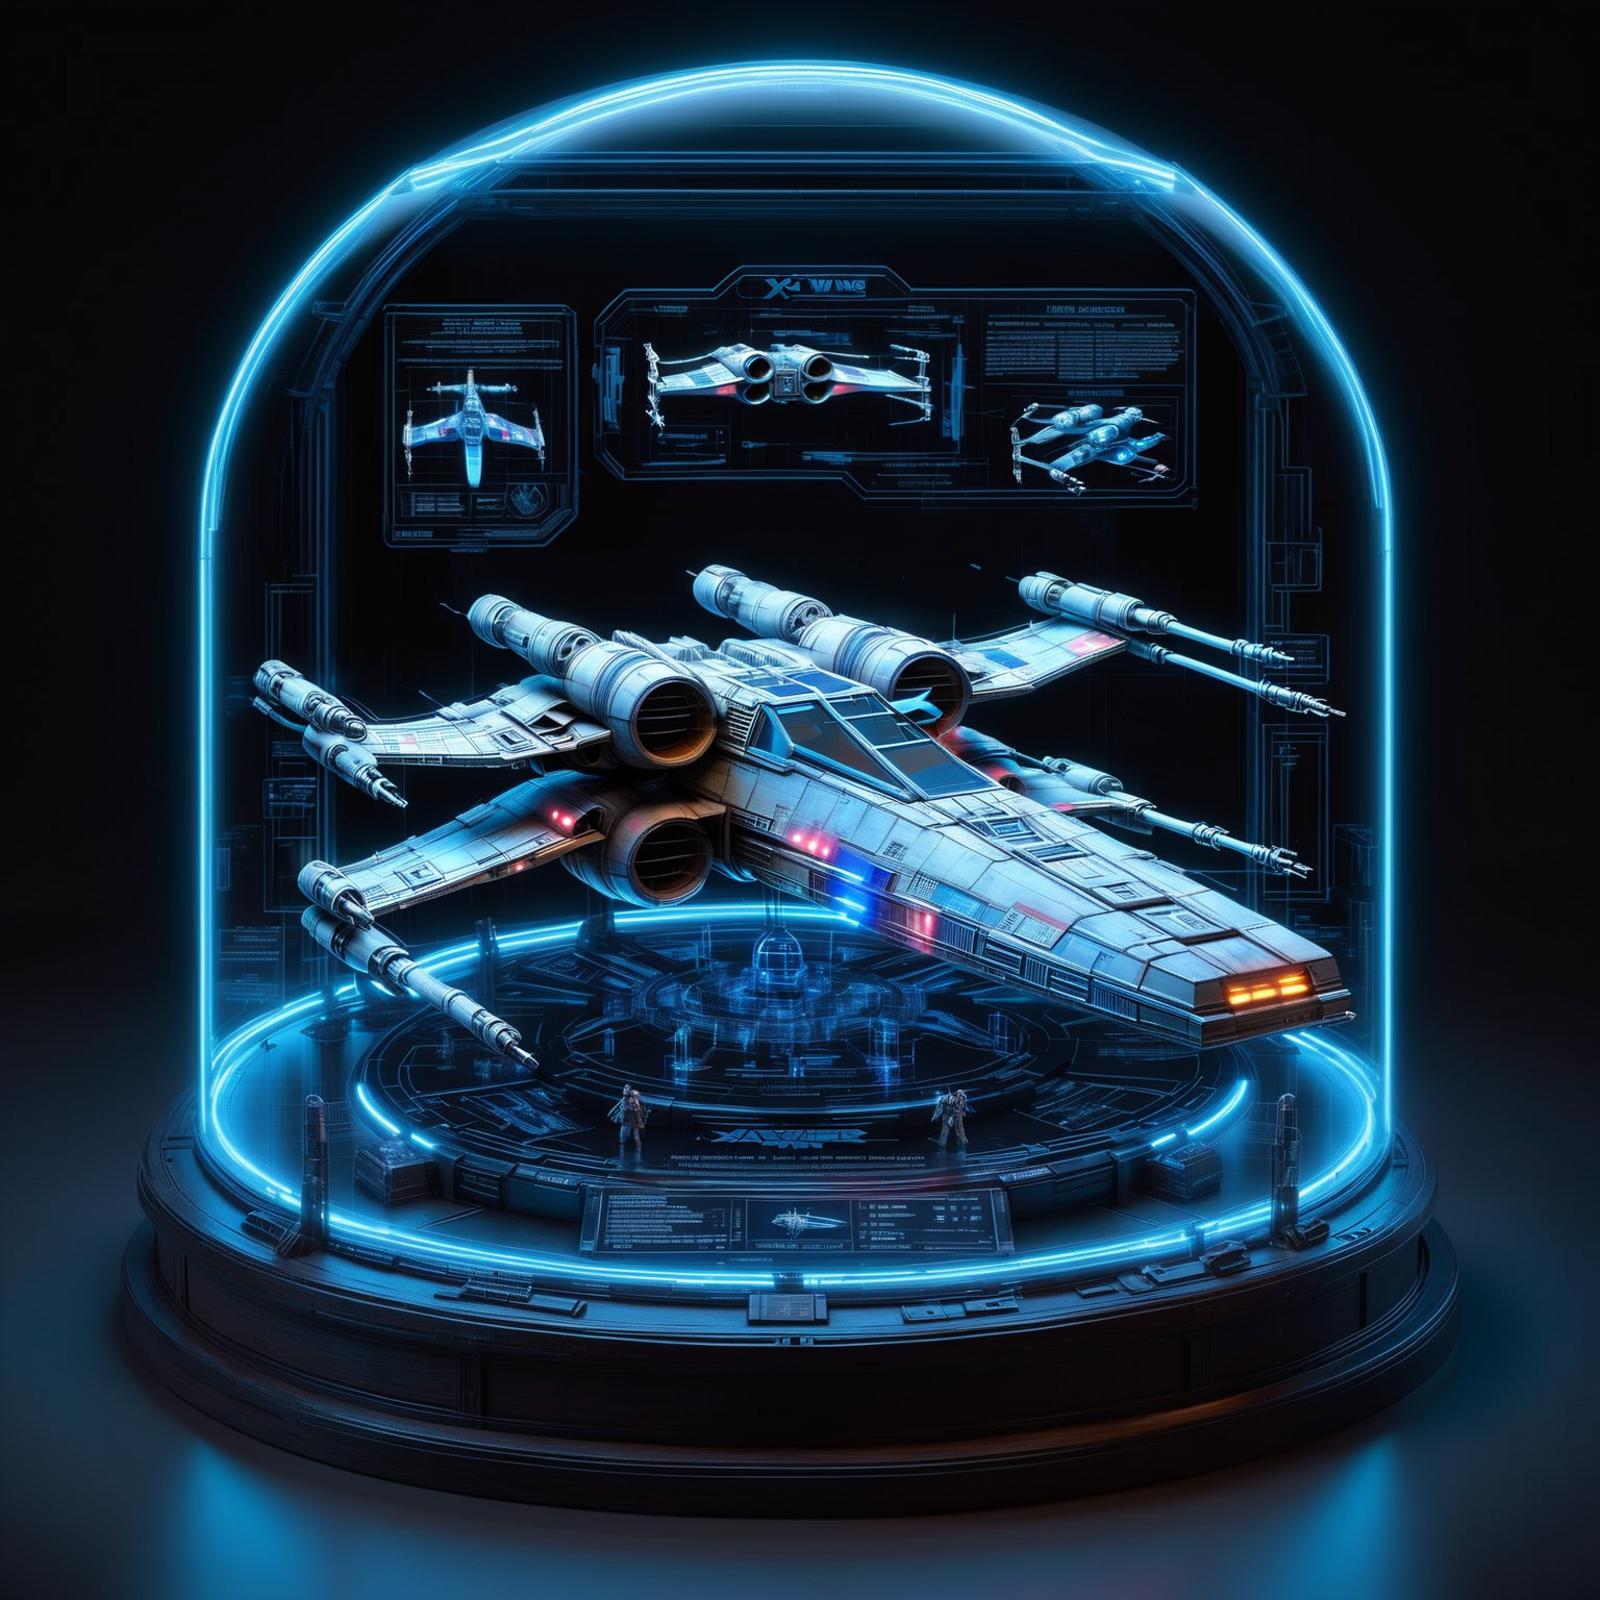 A space ship display with lights and a glass case.